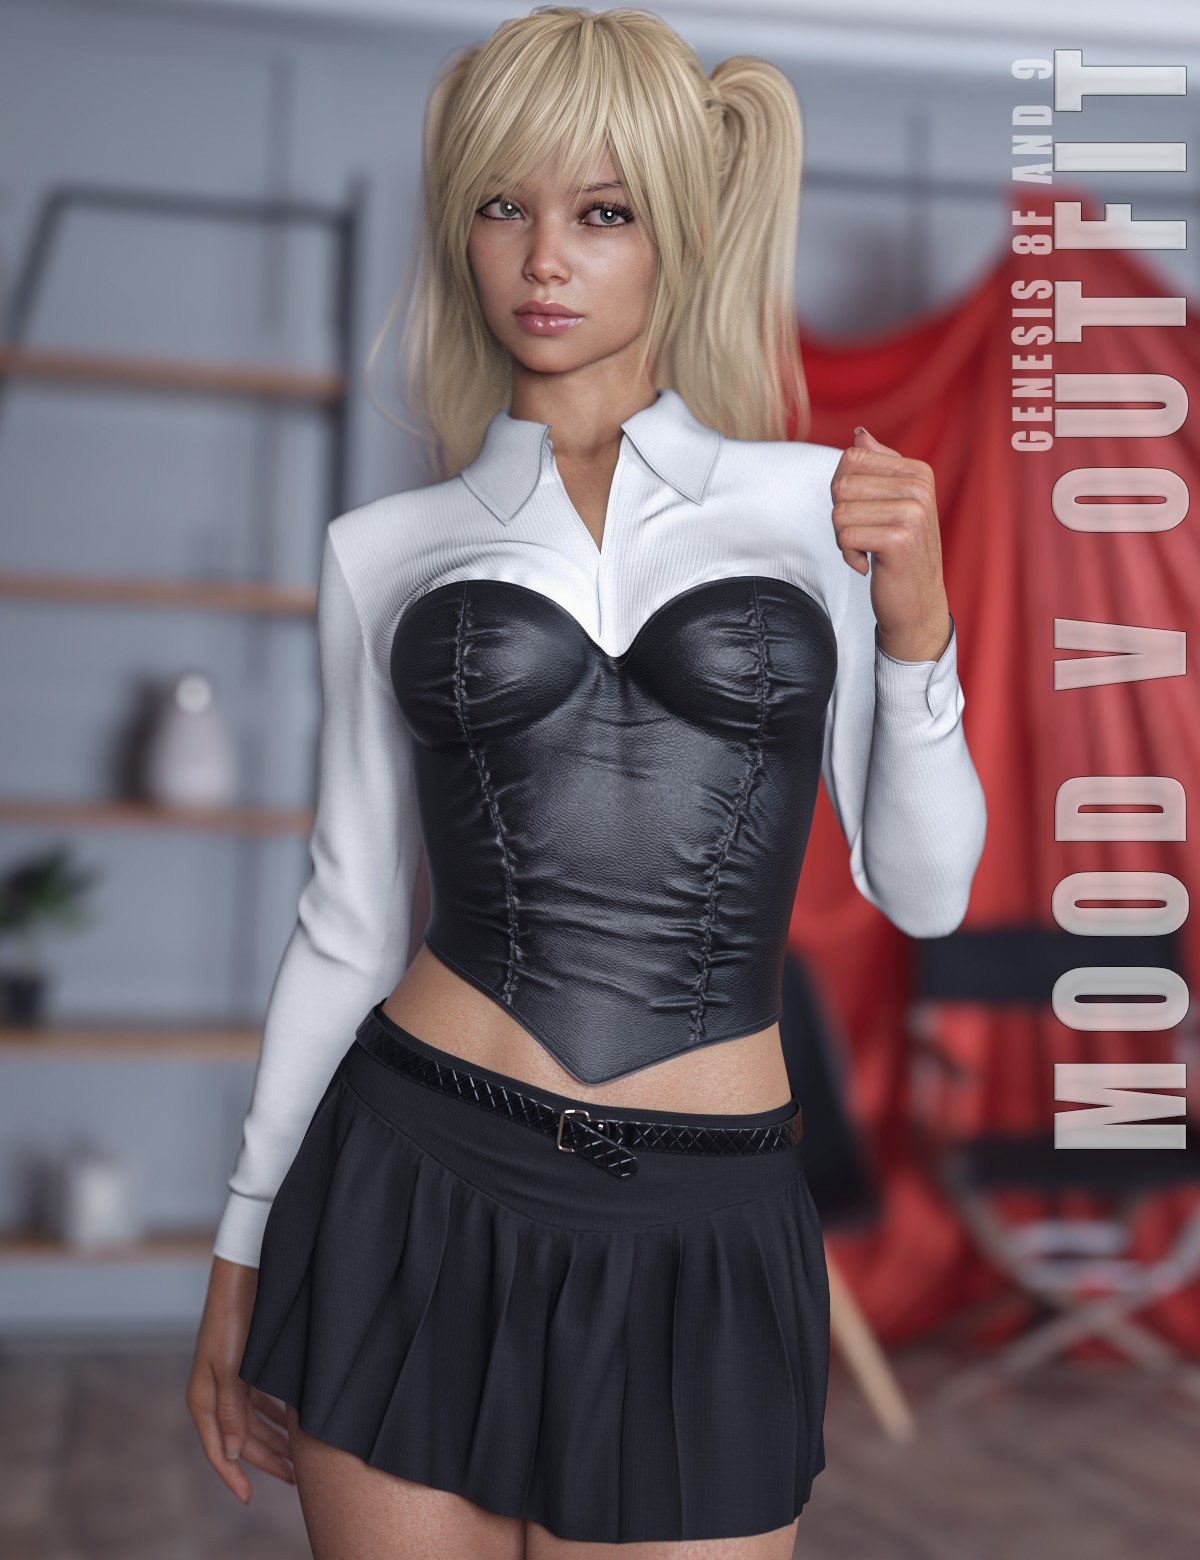 Clothing & Accessories - Free Daz 3D Models